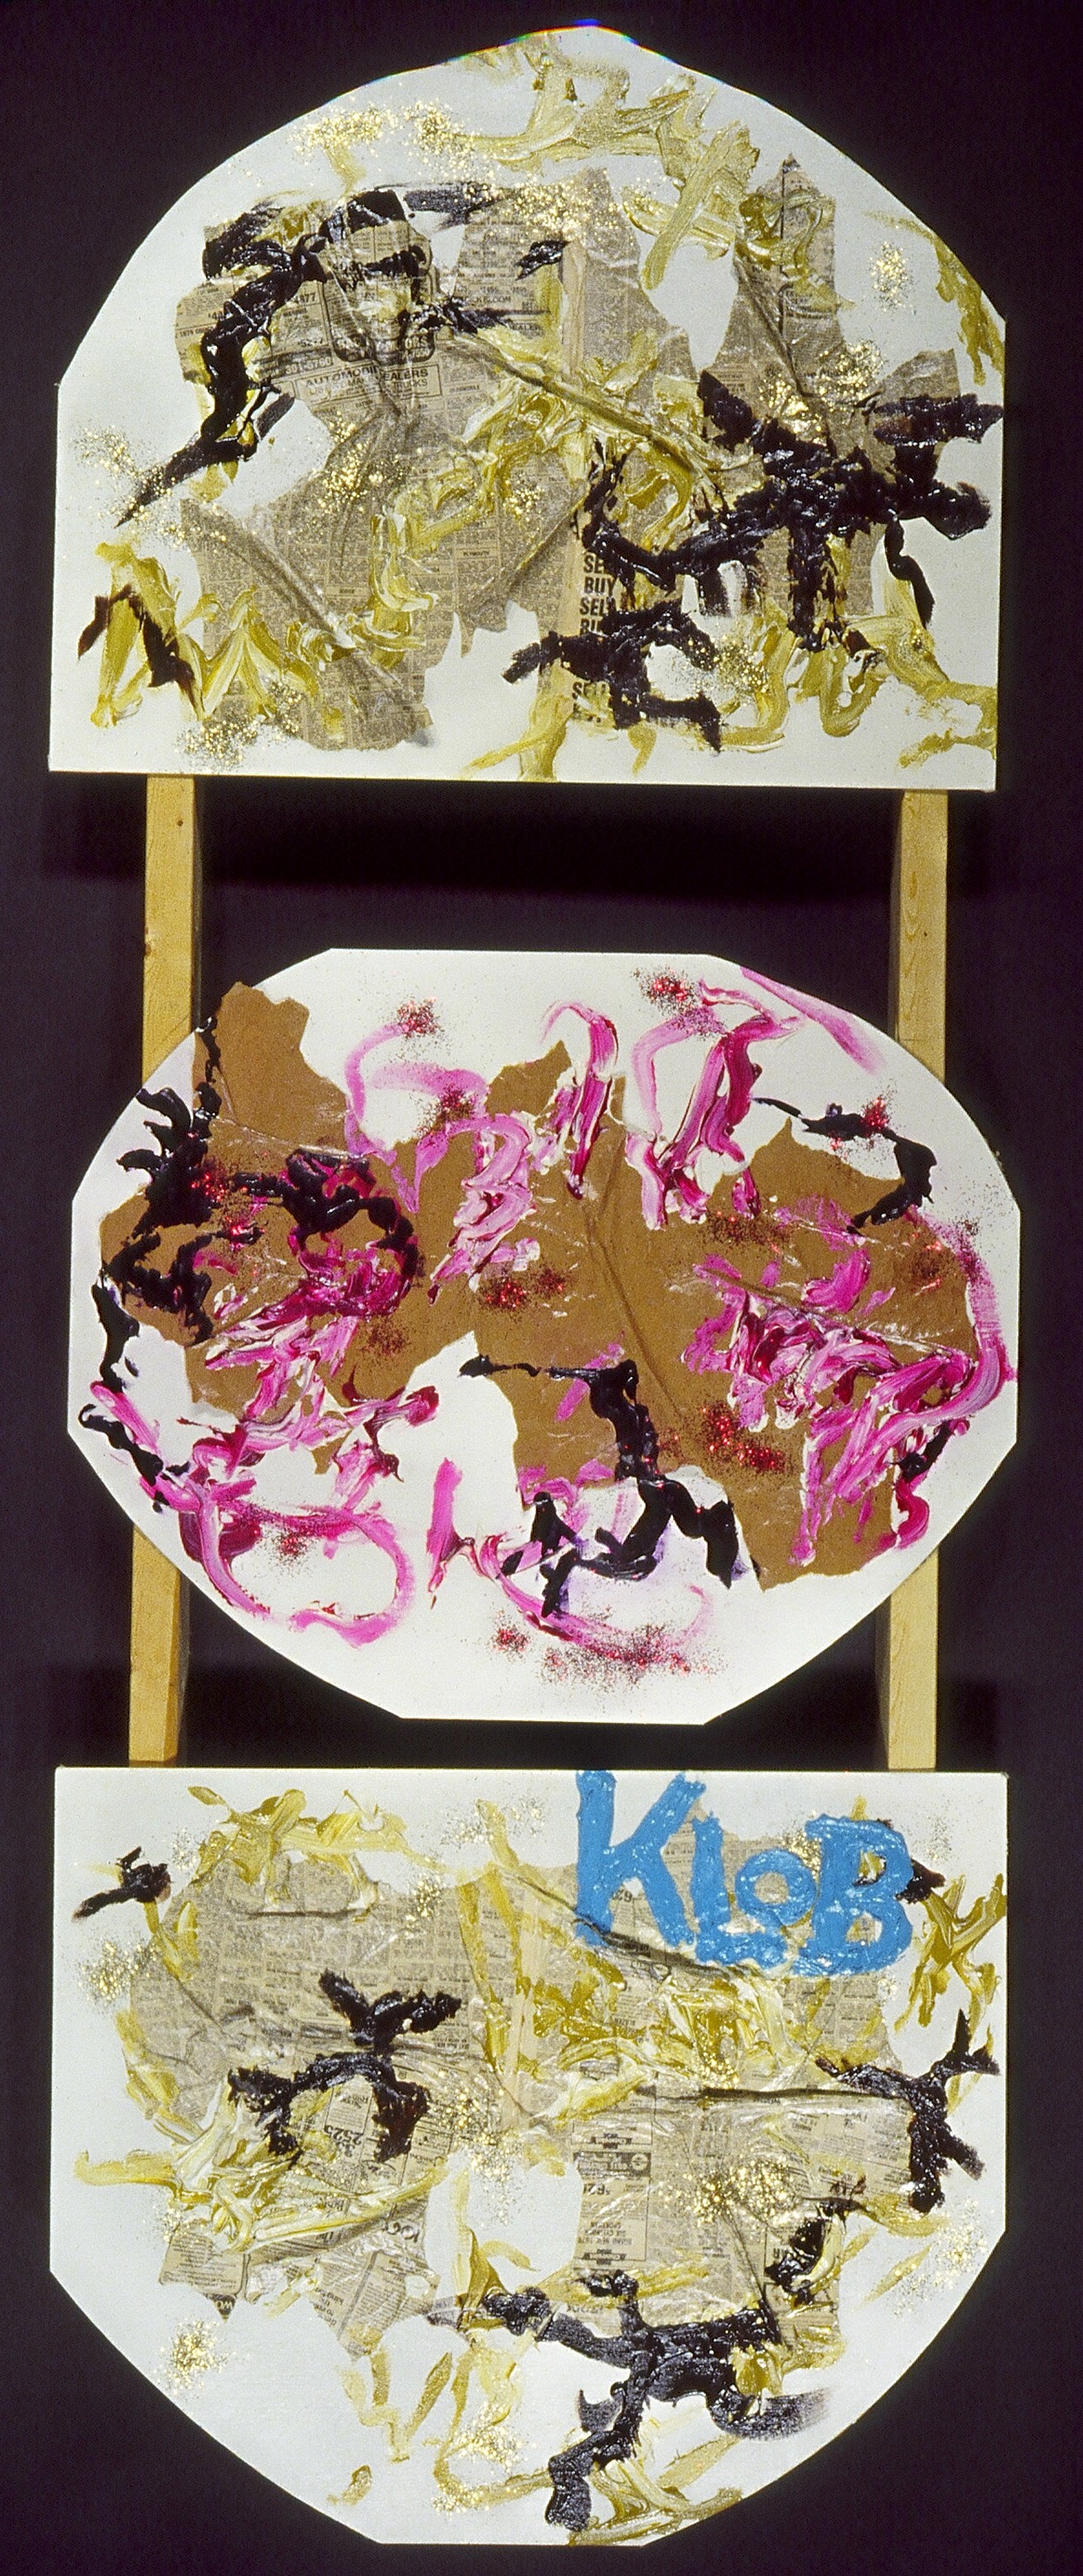 1977; acrylic, newspaper, brown paper bag; 6 ft 8 in X 36 in